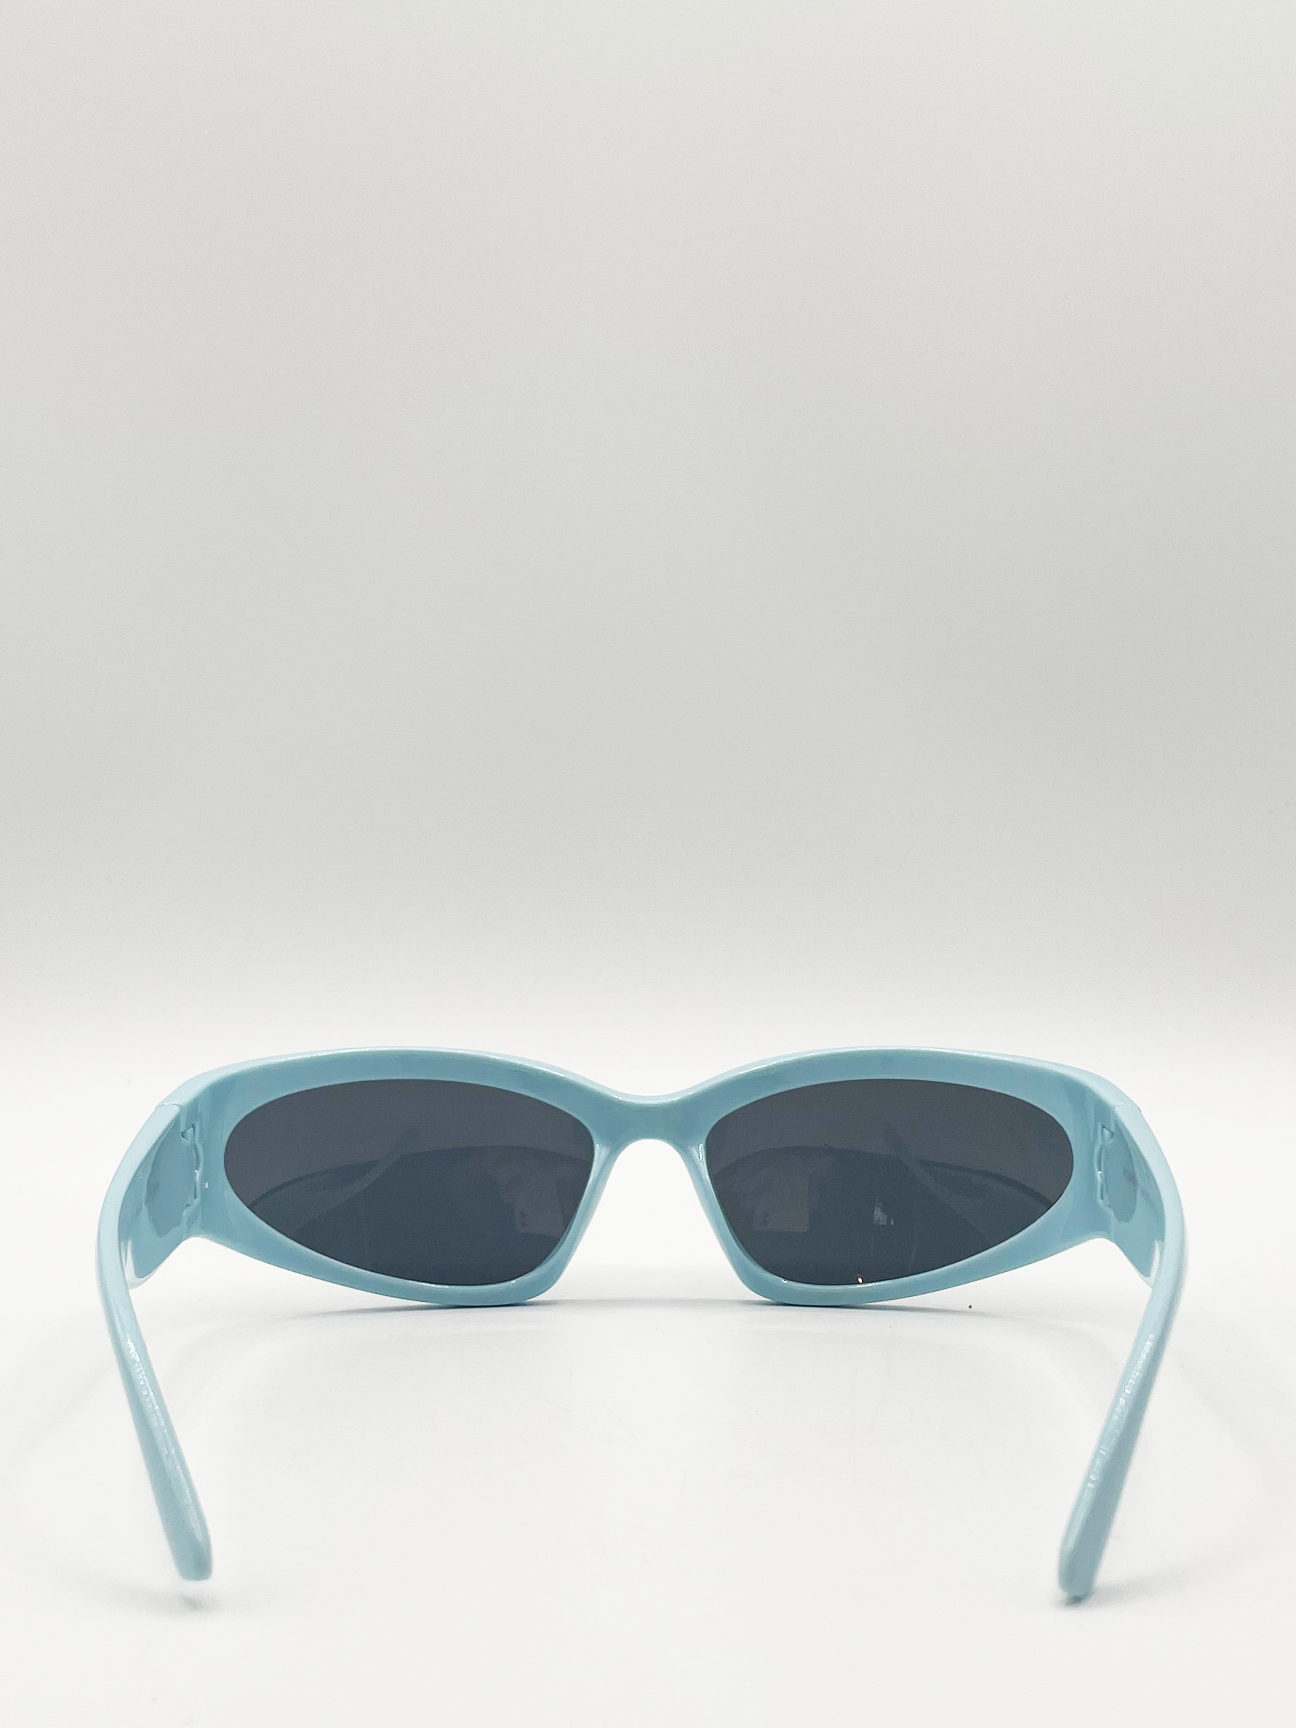 Baby Blue Racer Style Sunglasses with Black Lenses